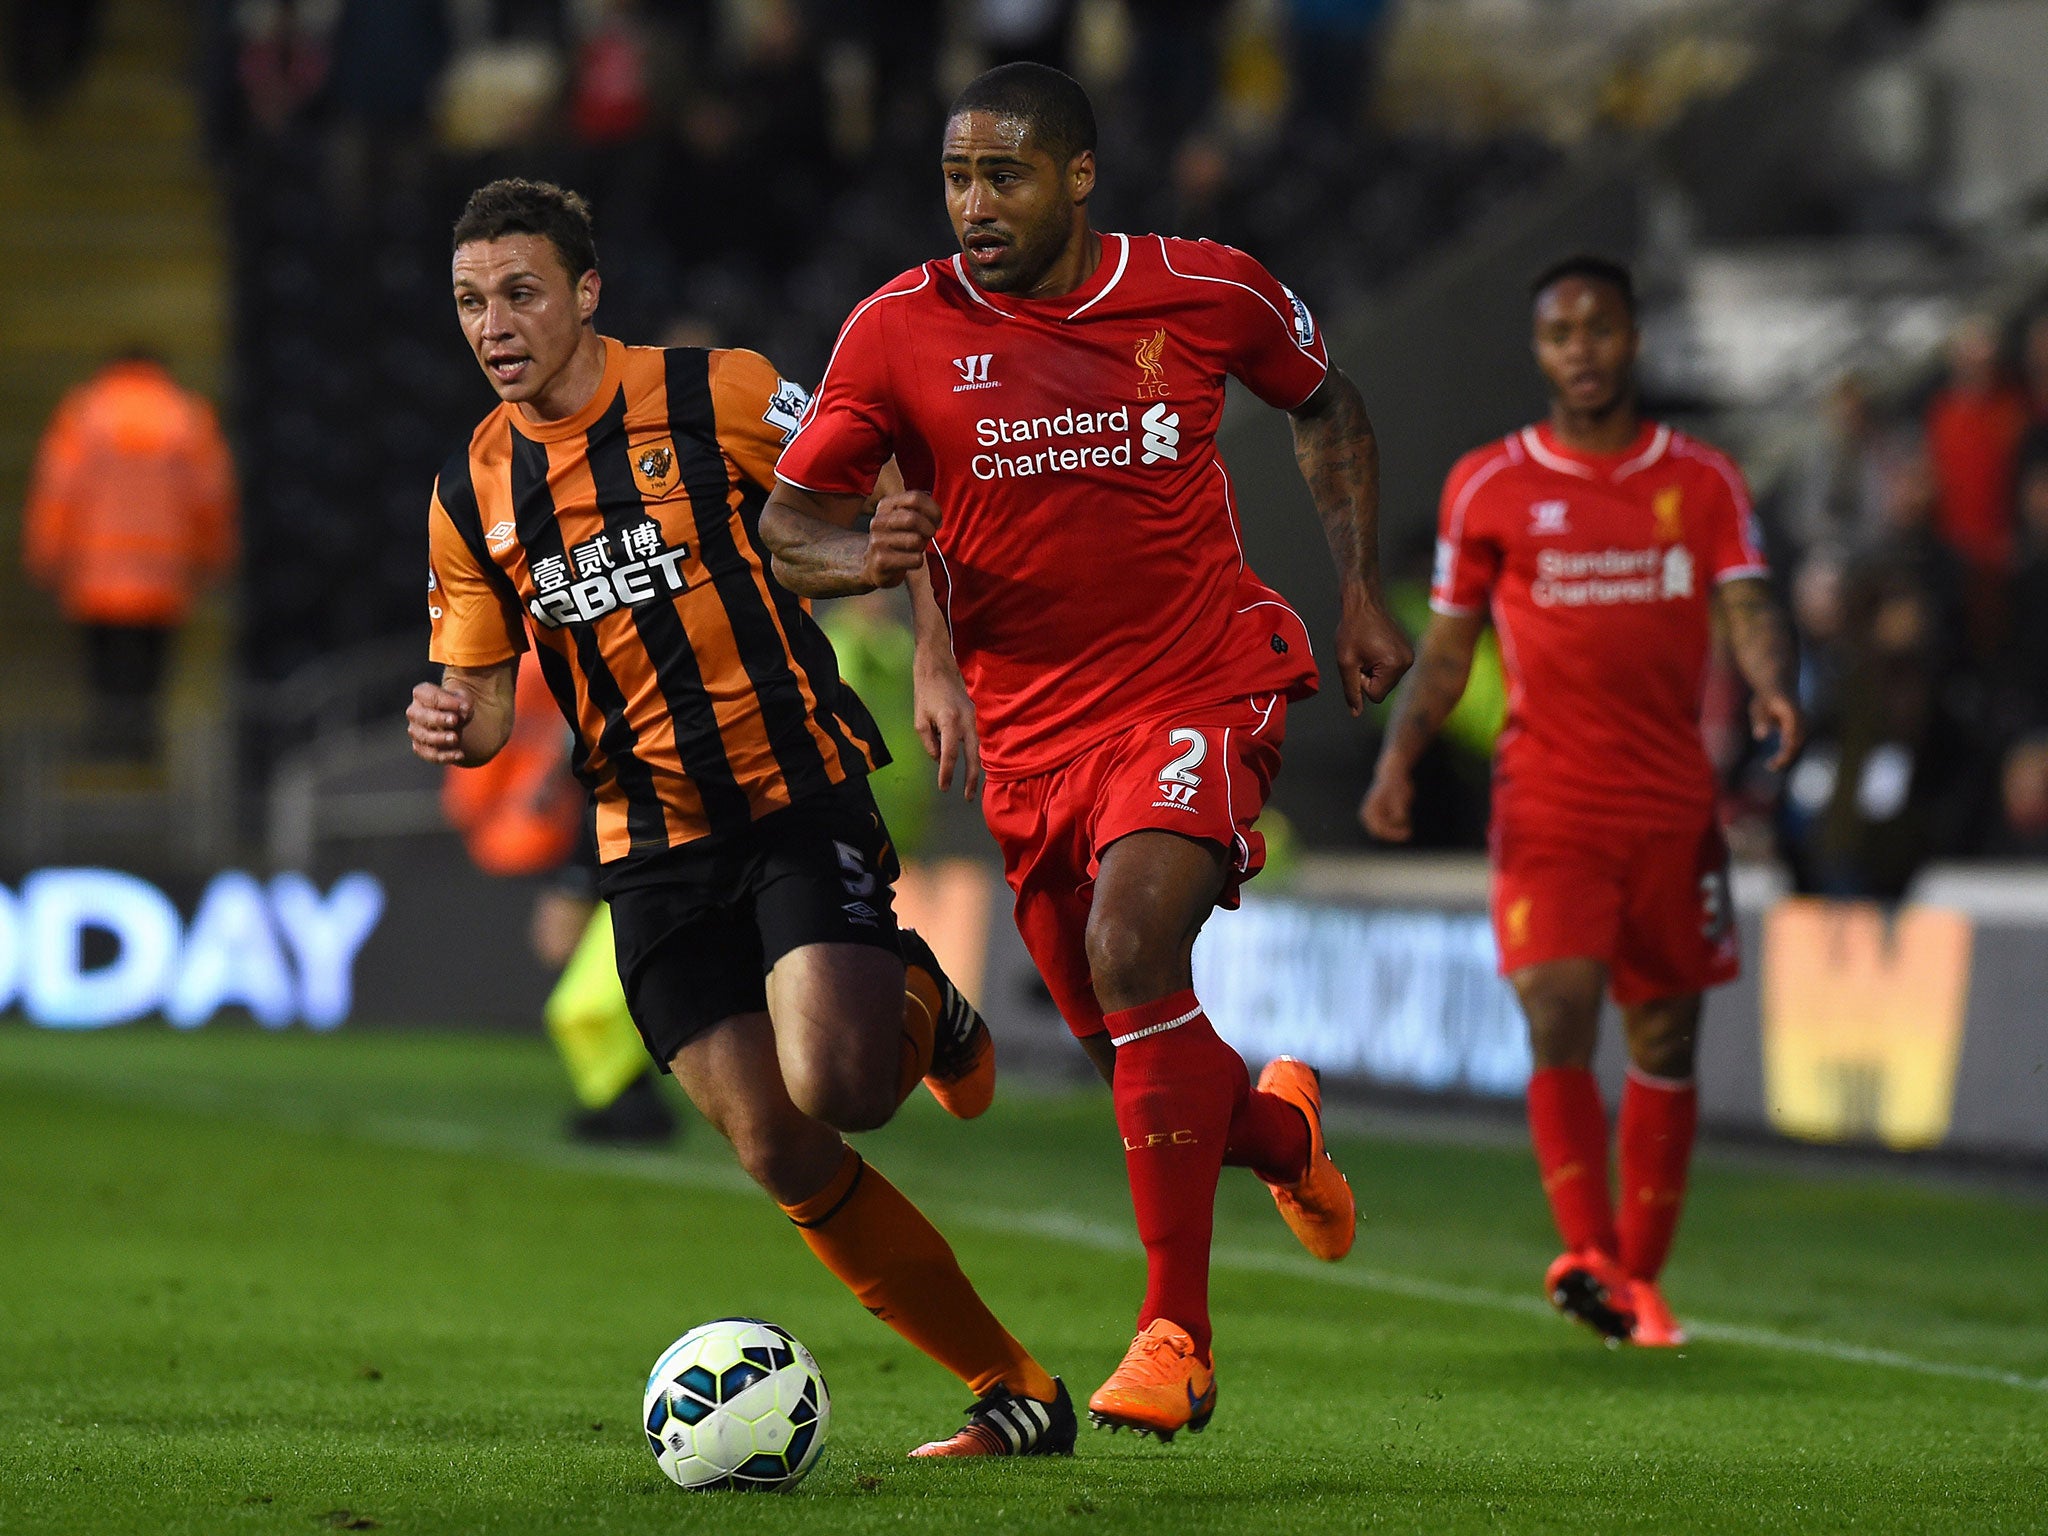 Glen Johnson expects to leave Liverpool in the summer